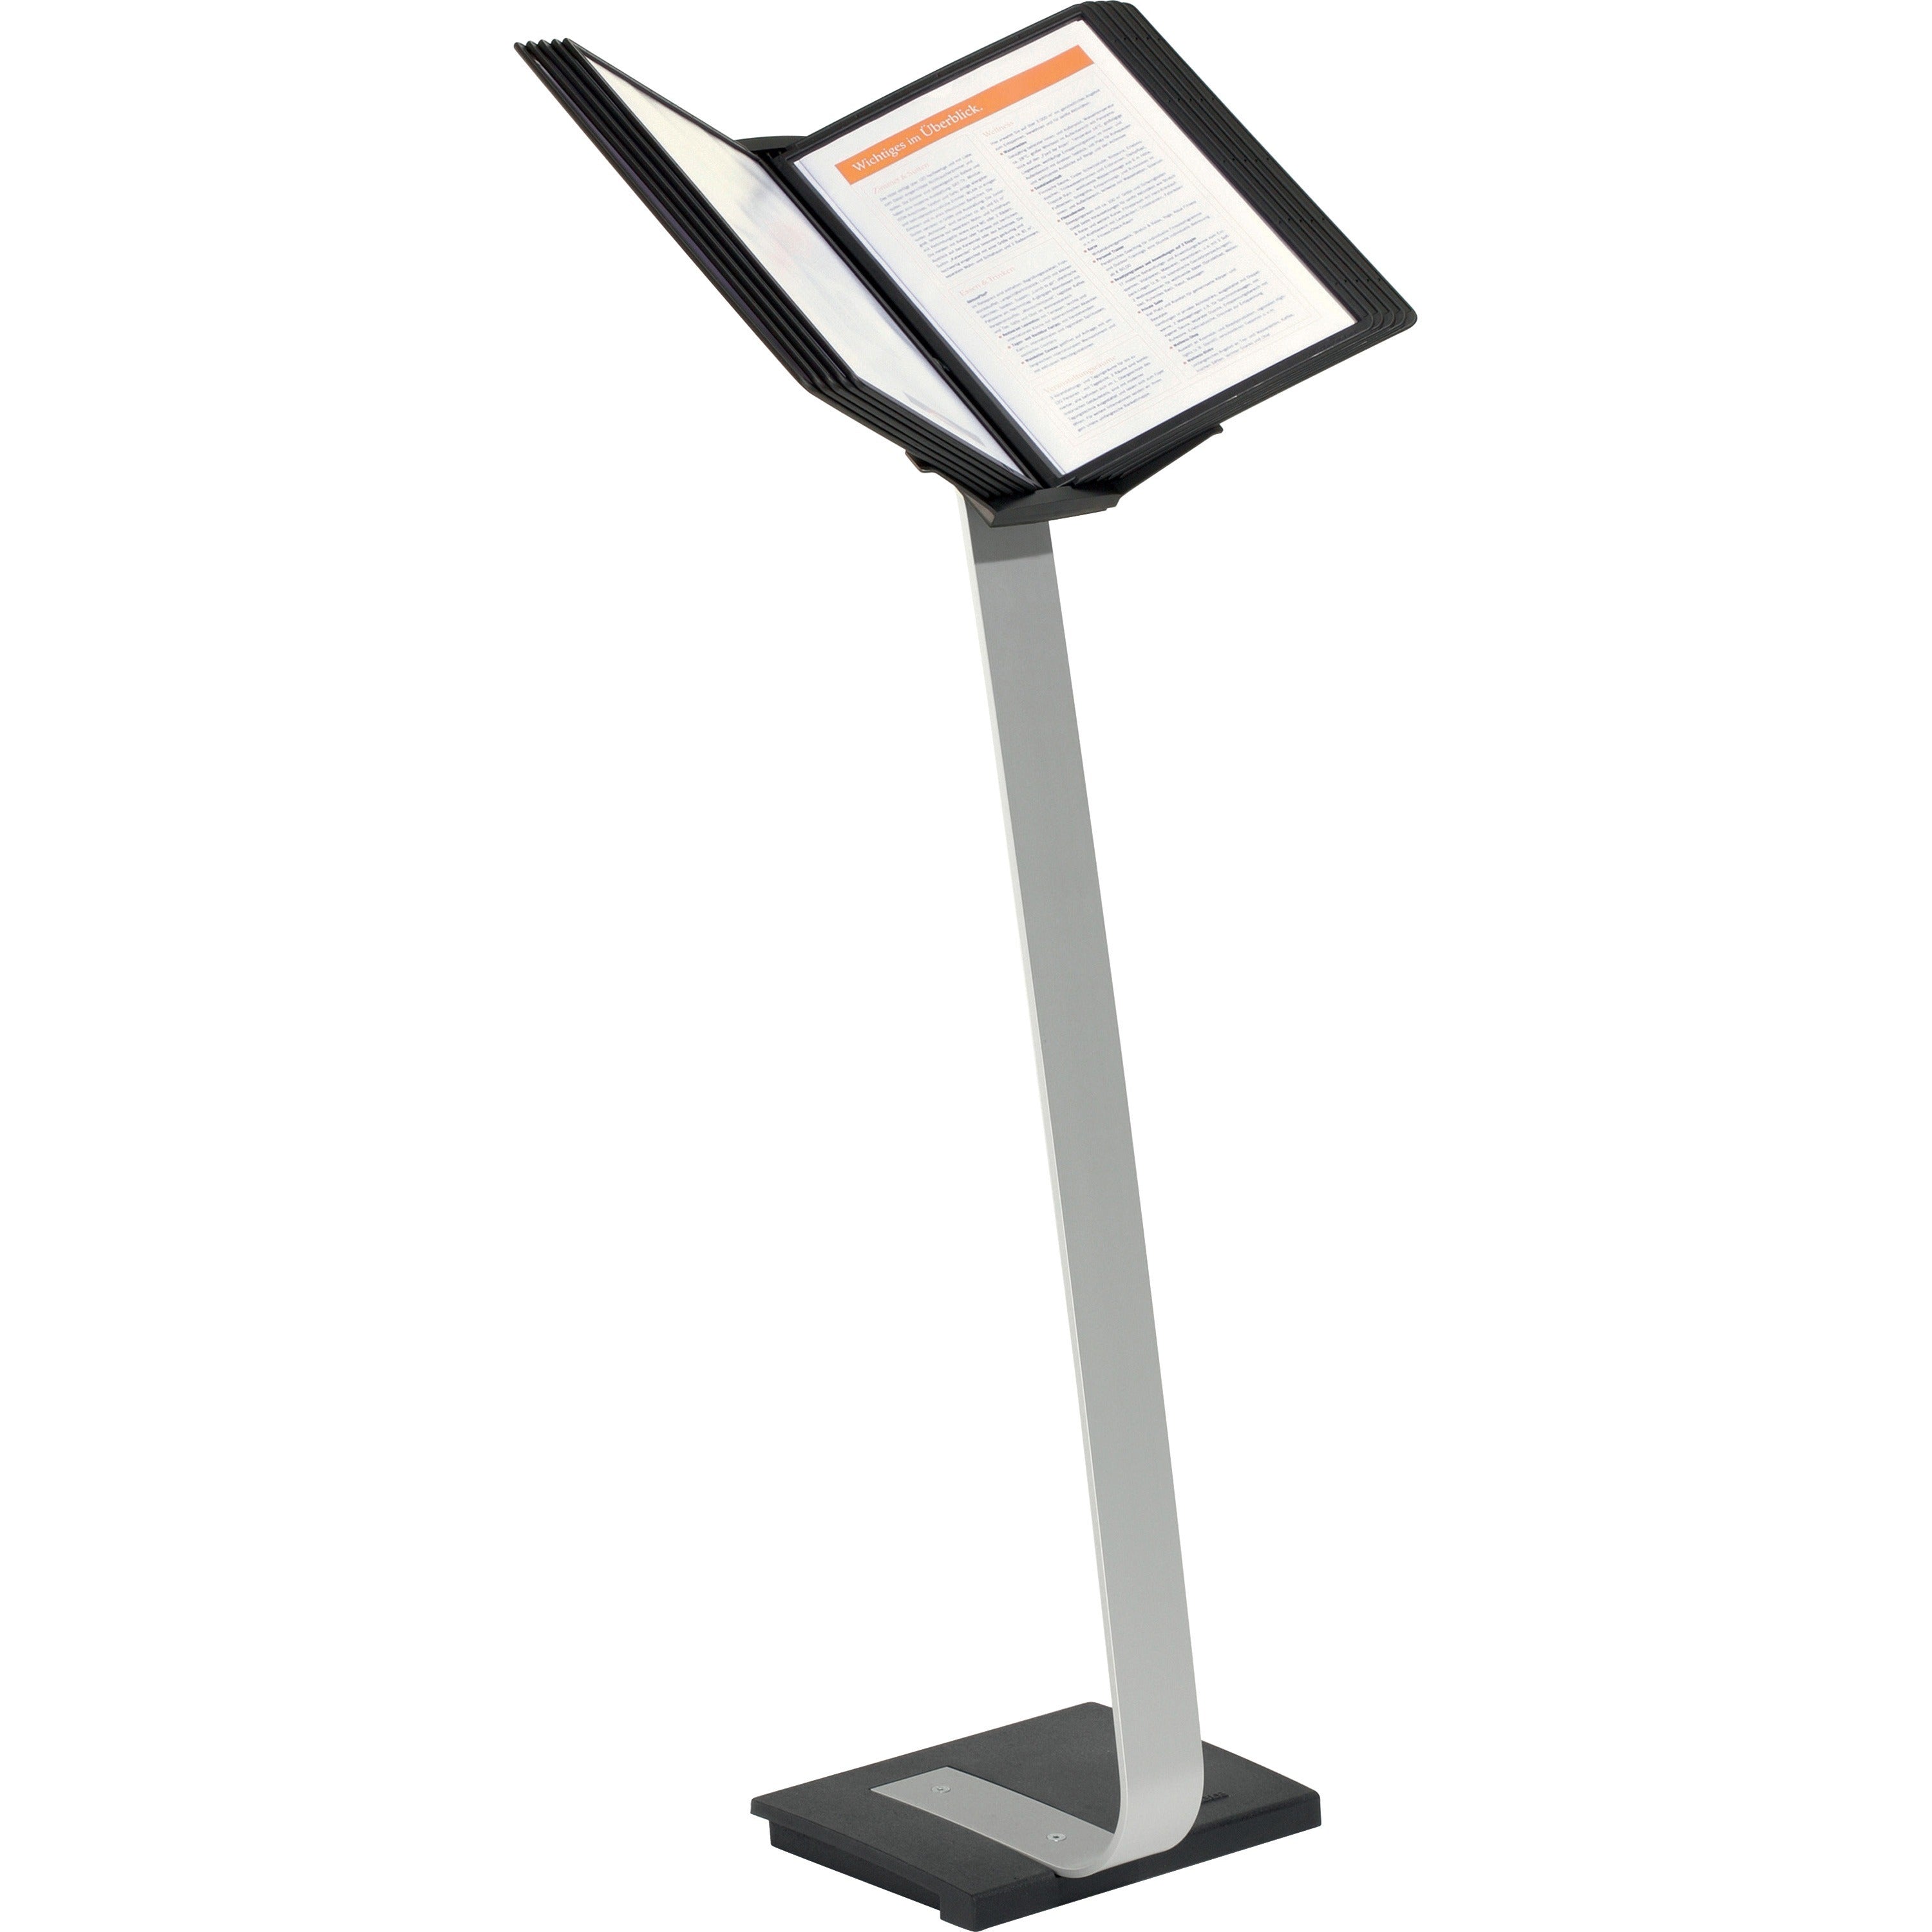 sherpa-stand-pro-10-support-letter-850-x-11-media-rugged-anti-glare-black-35-height-x-147-width-x-426-depth-1-each_dbl591501 - 1